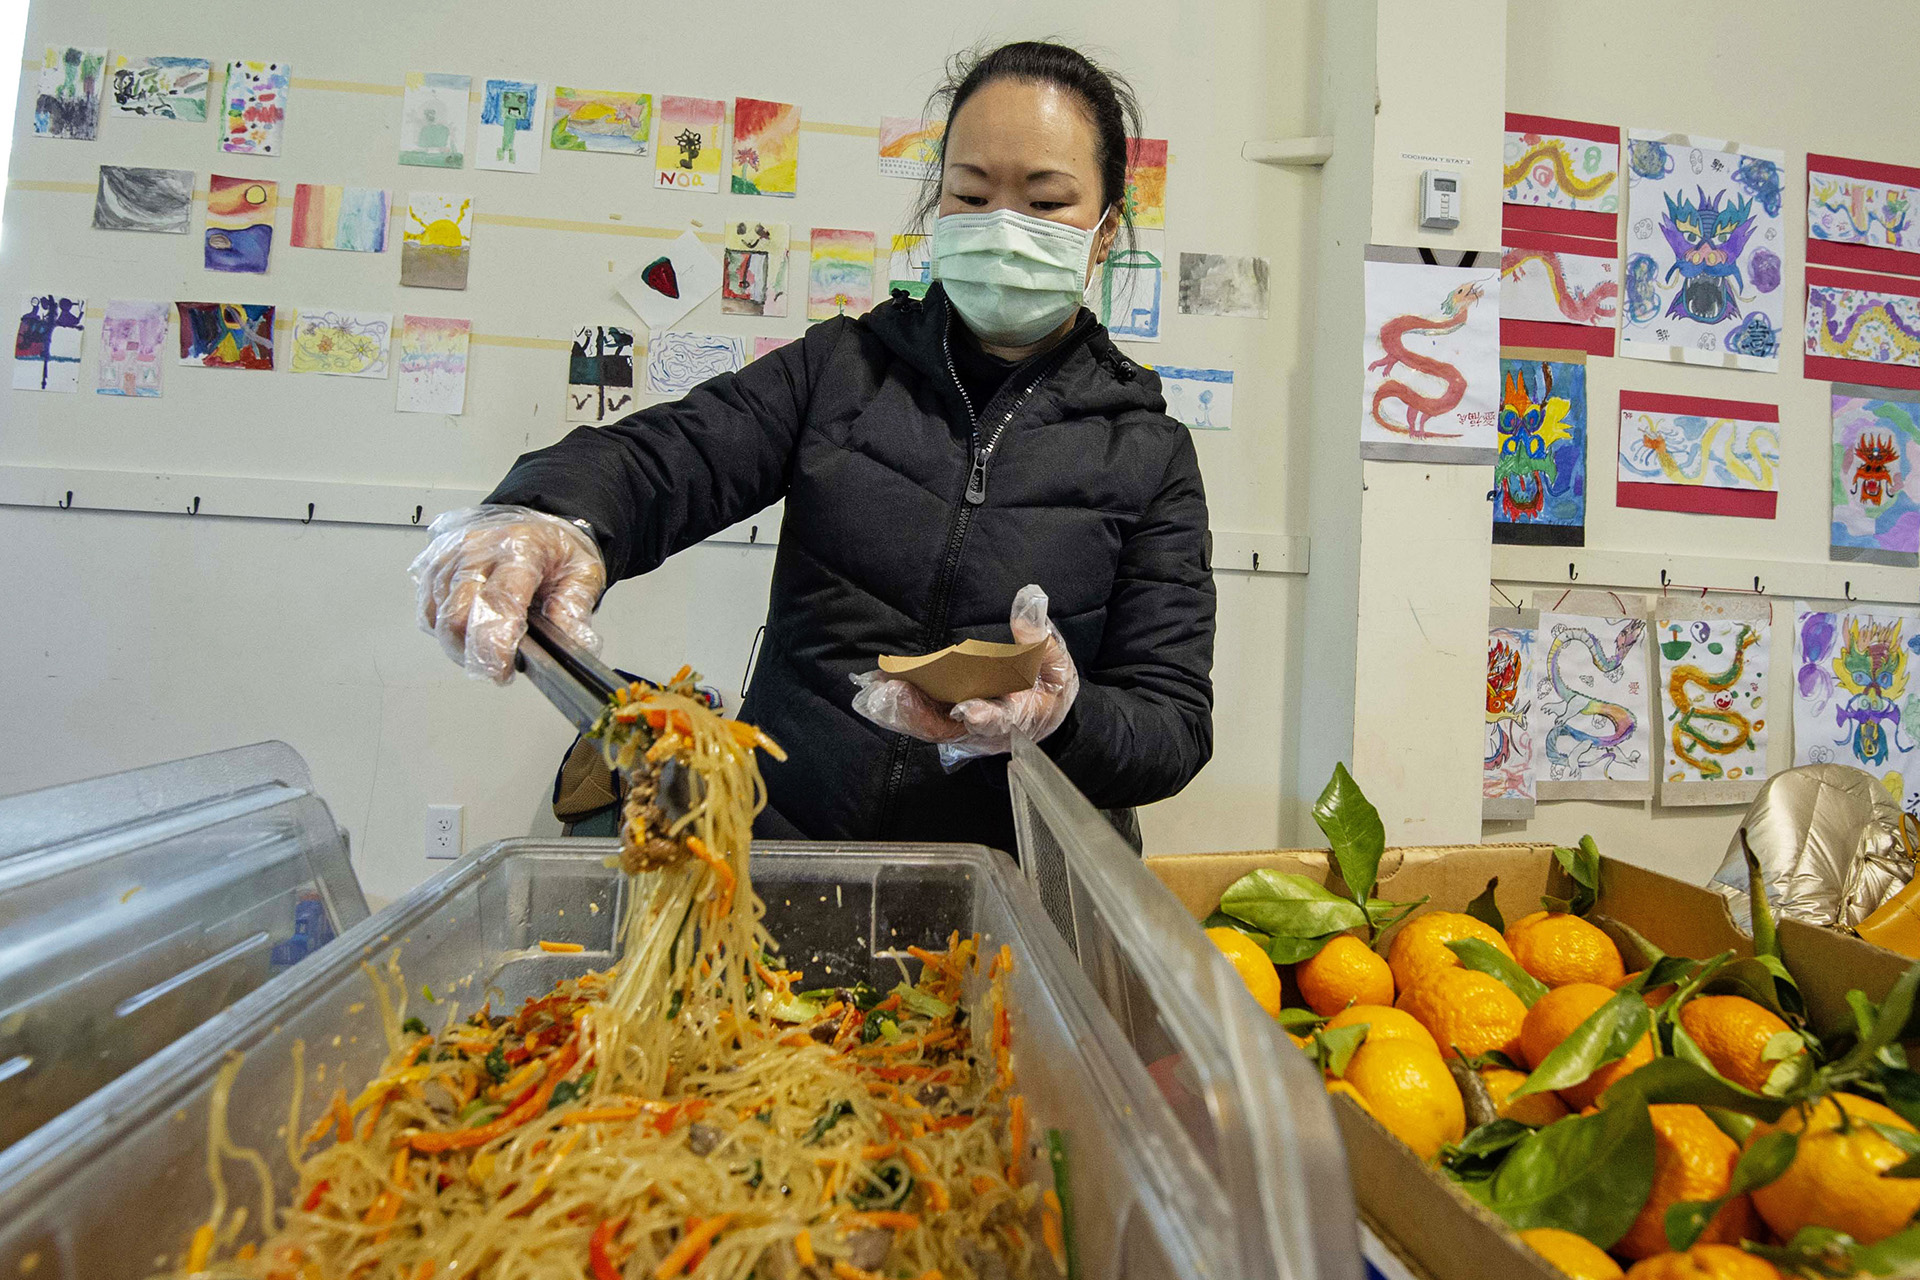 Amy Danos serves Korean japchae donated by Salaryman restaurant during the Lunar New Year Celebration at Legacy Park in Decatur on Saturday, Jan. 29. 2022. Photo by Dean Hesse.